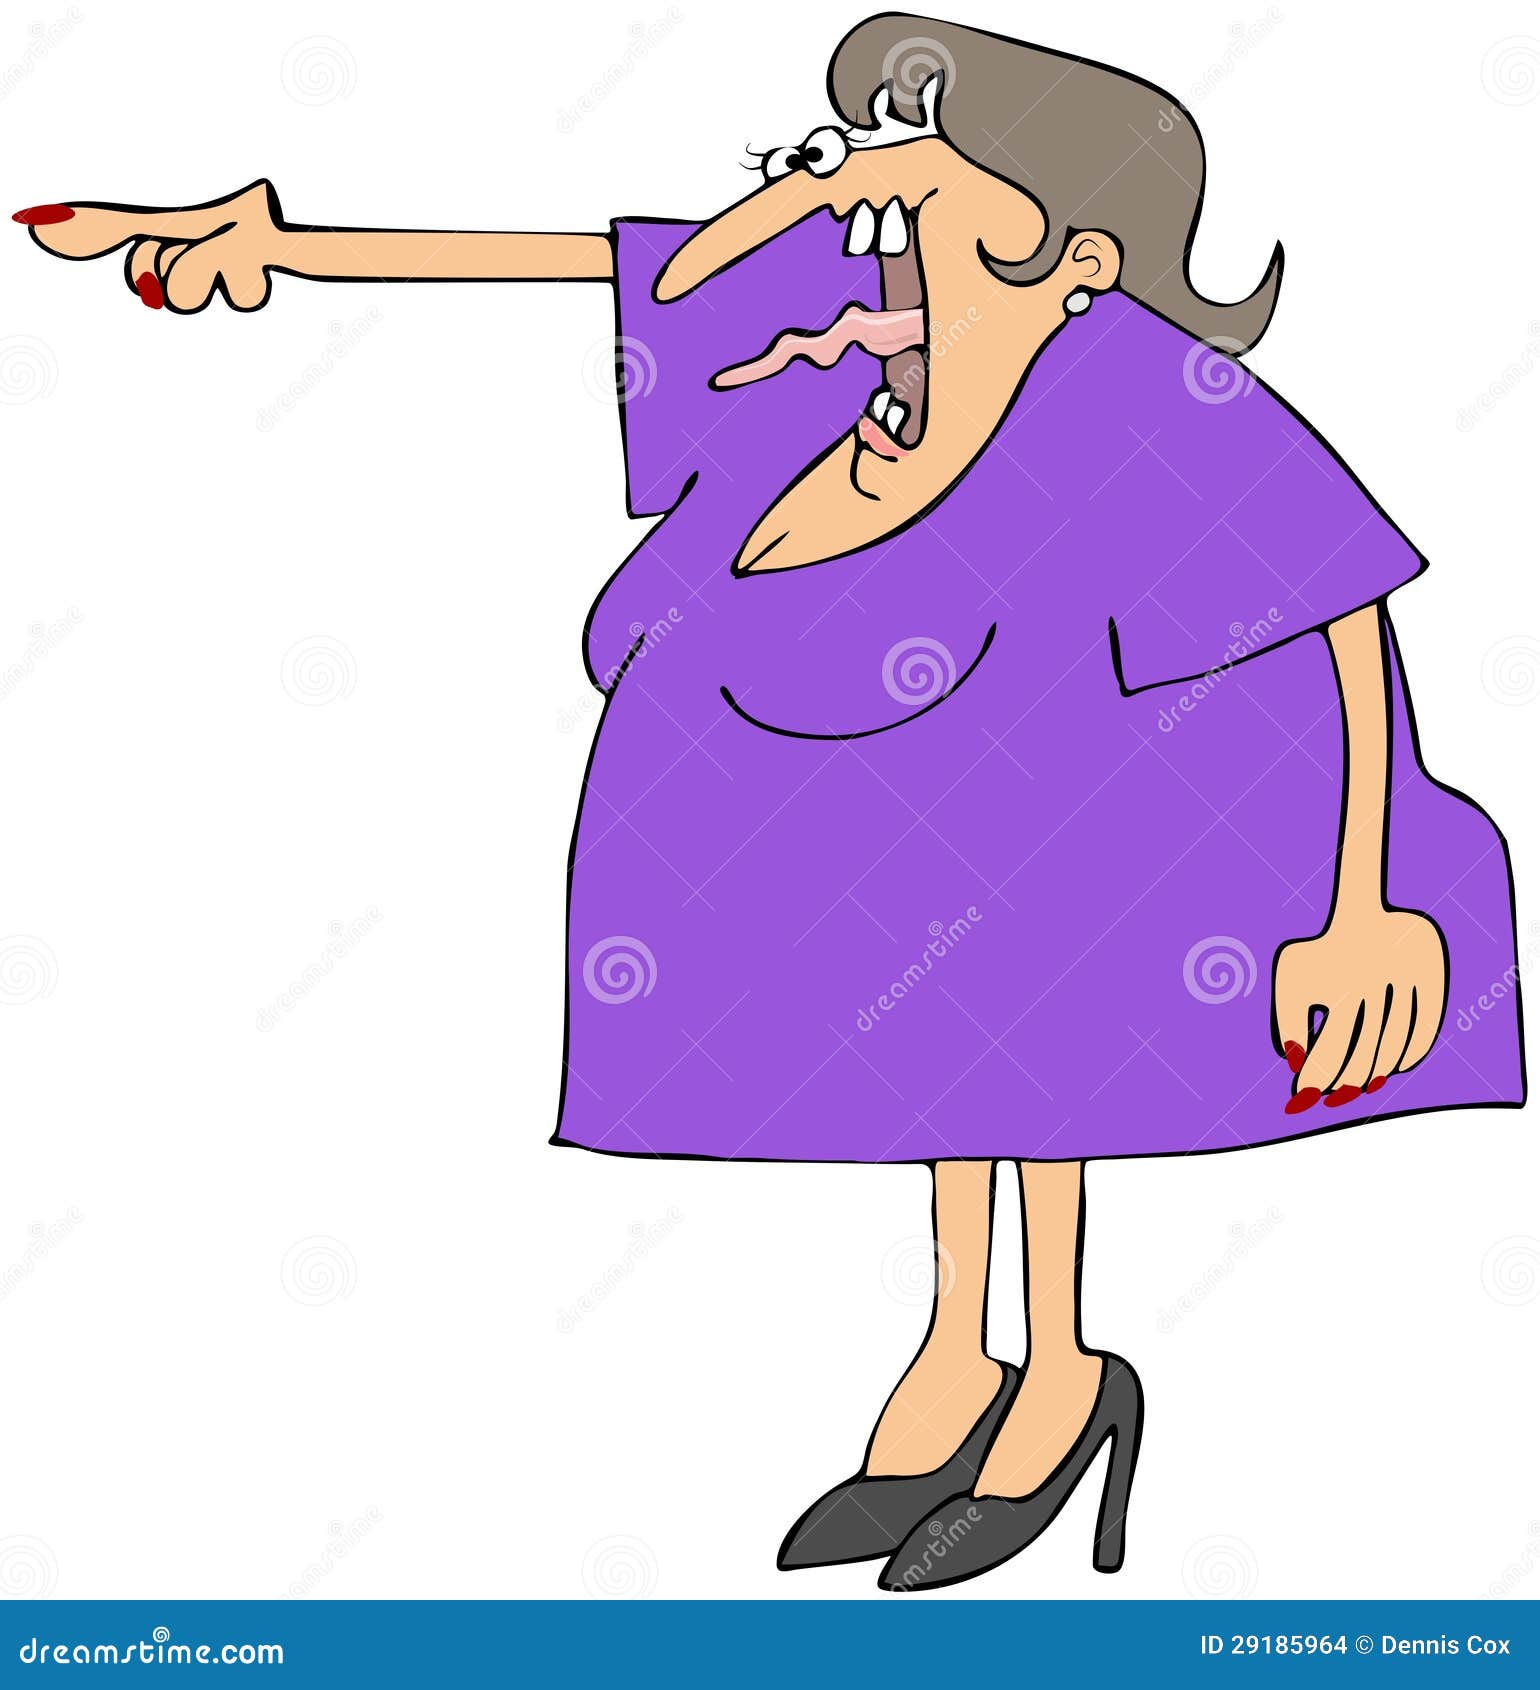 Screaming Woman Stock Images - Image: 29185964